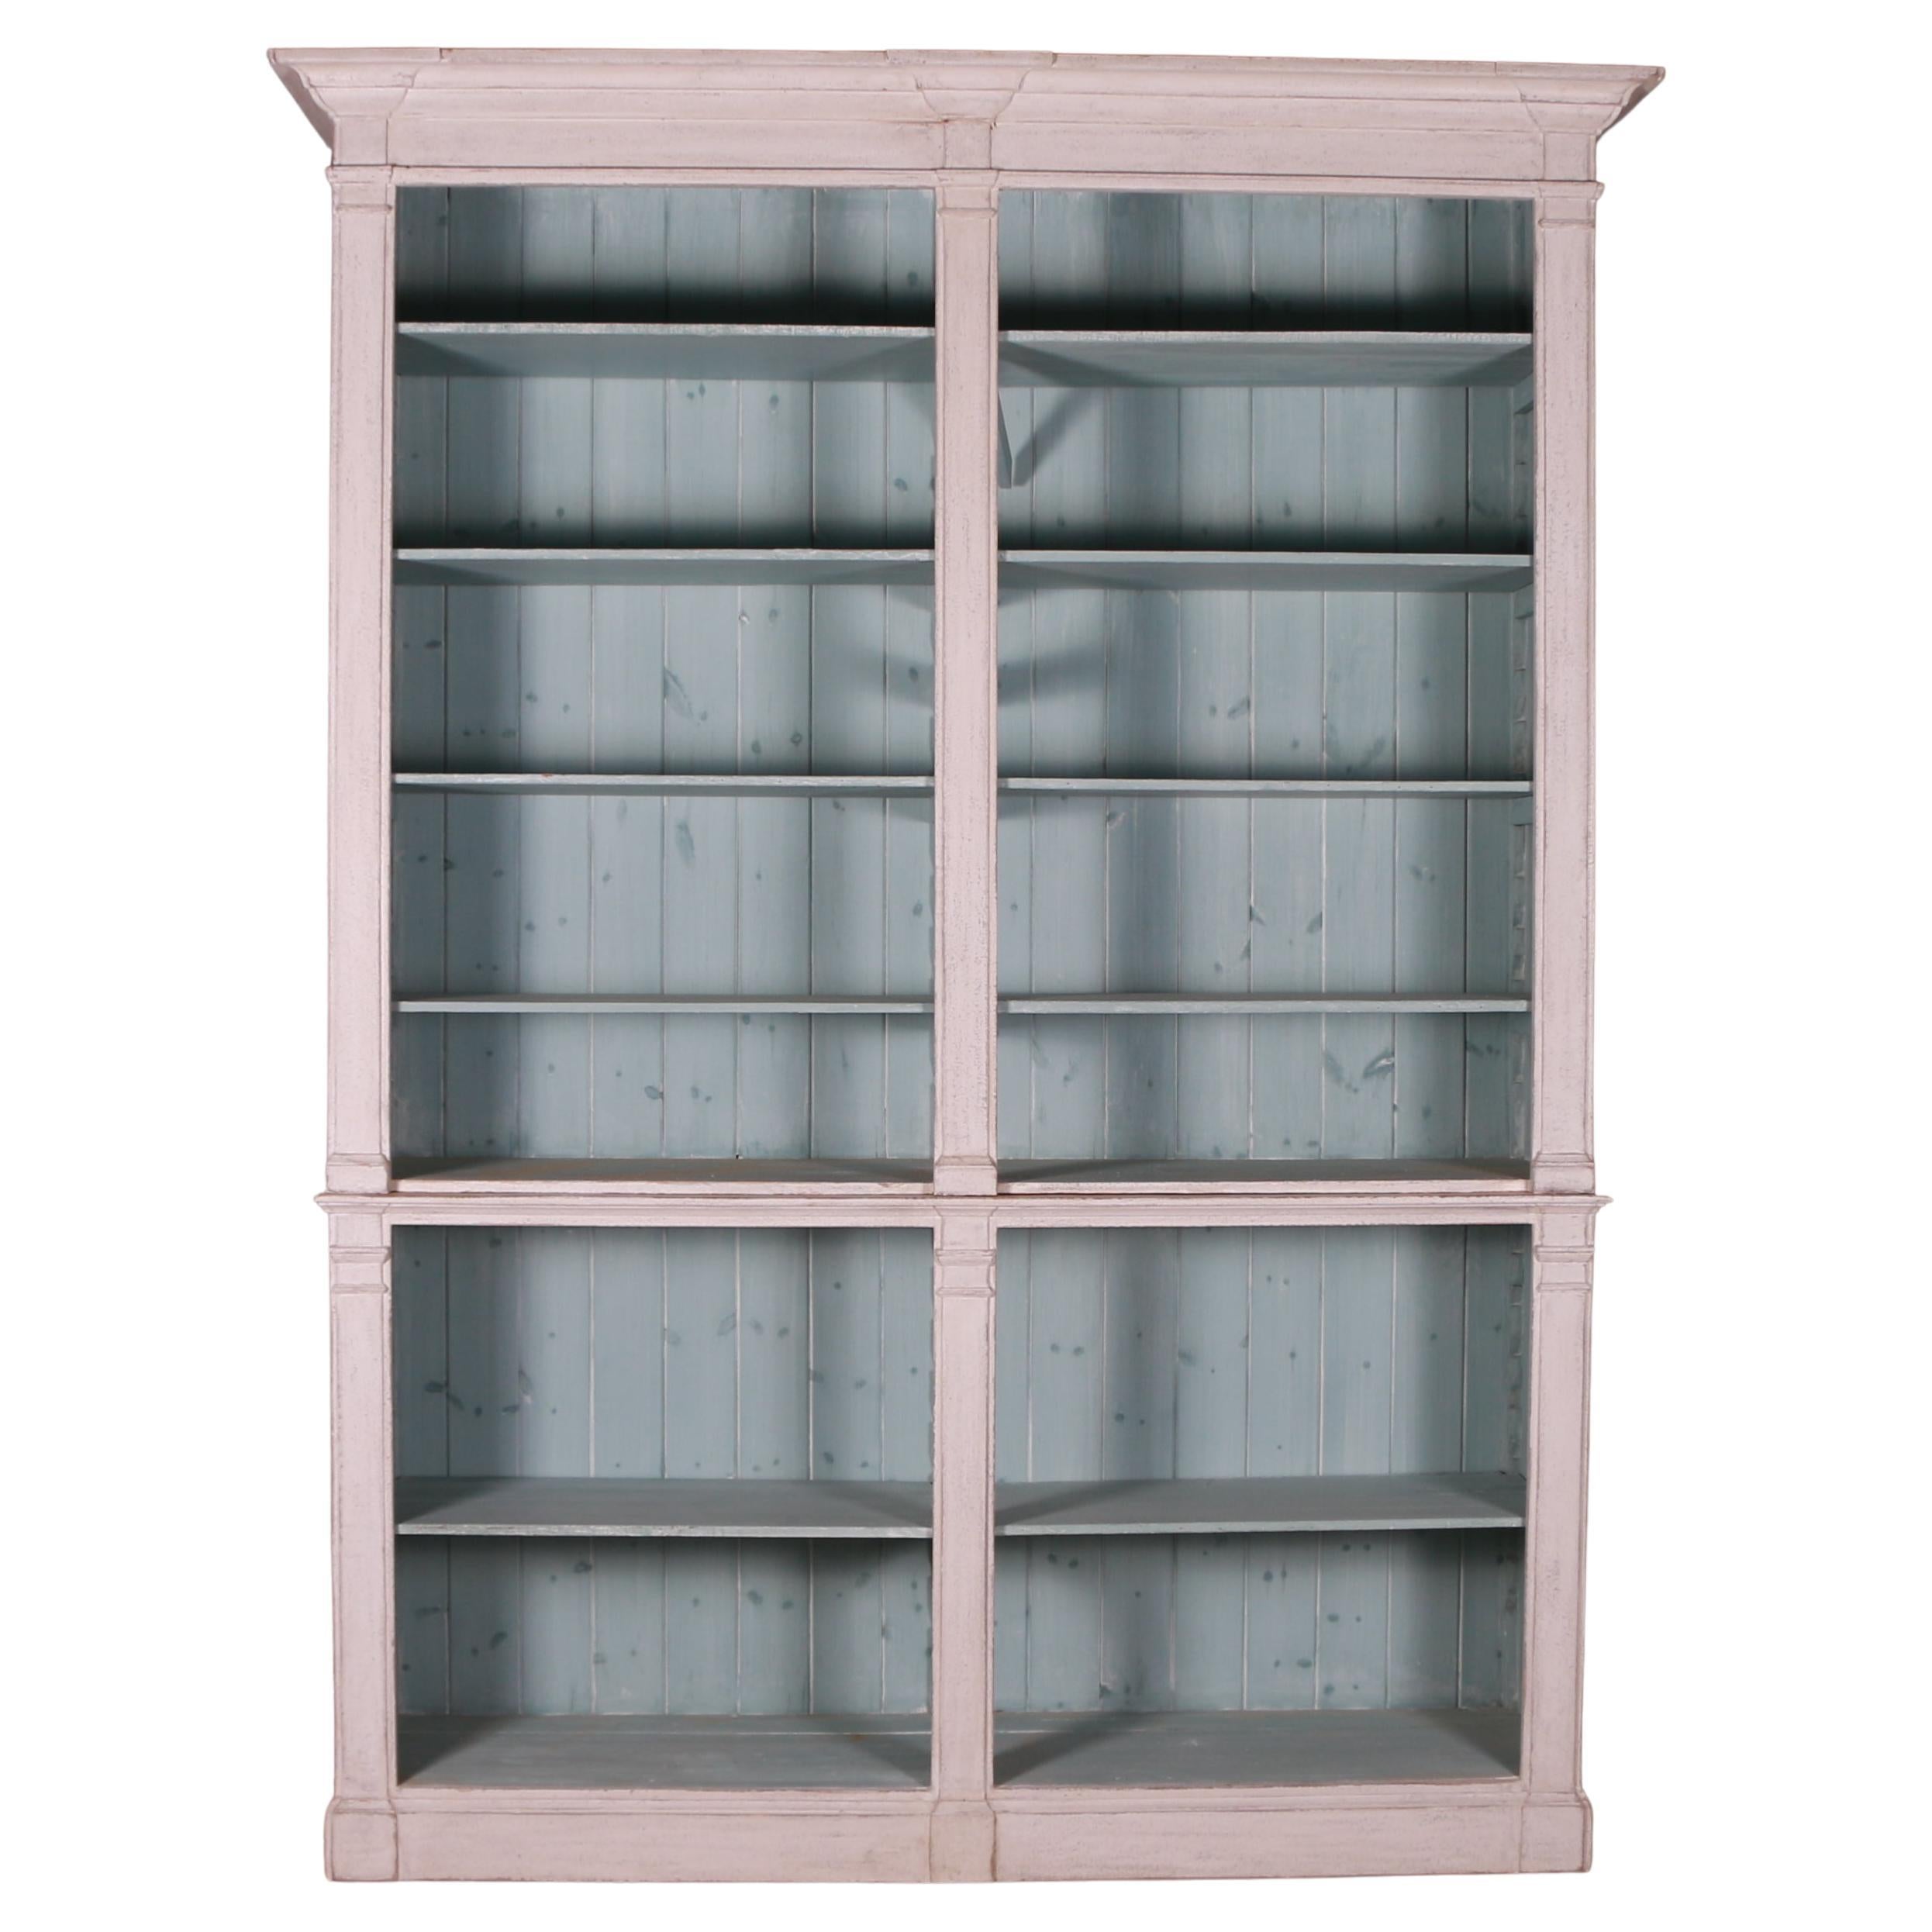 English Architectural Shop Fitting / Bookcase